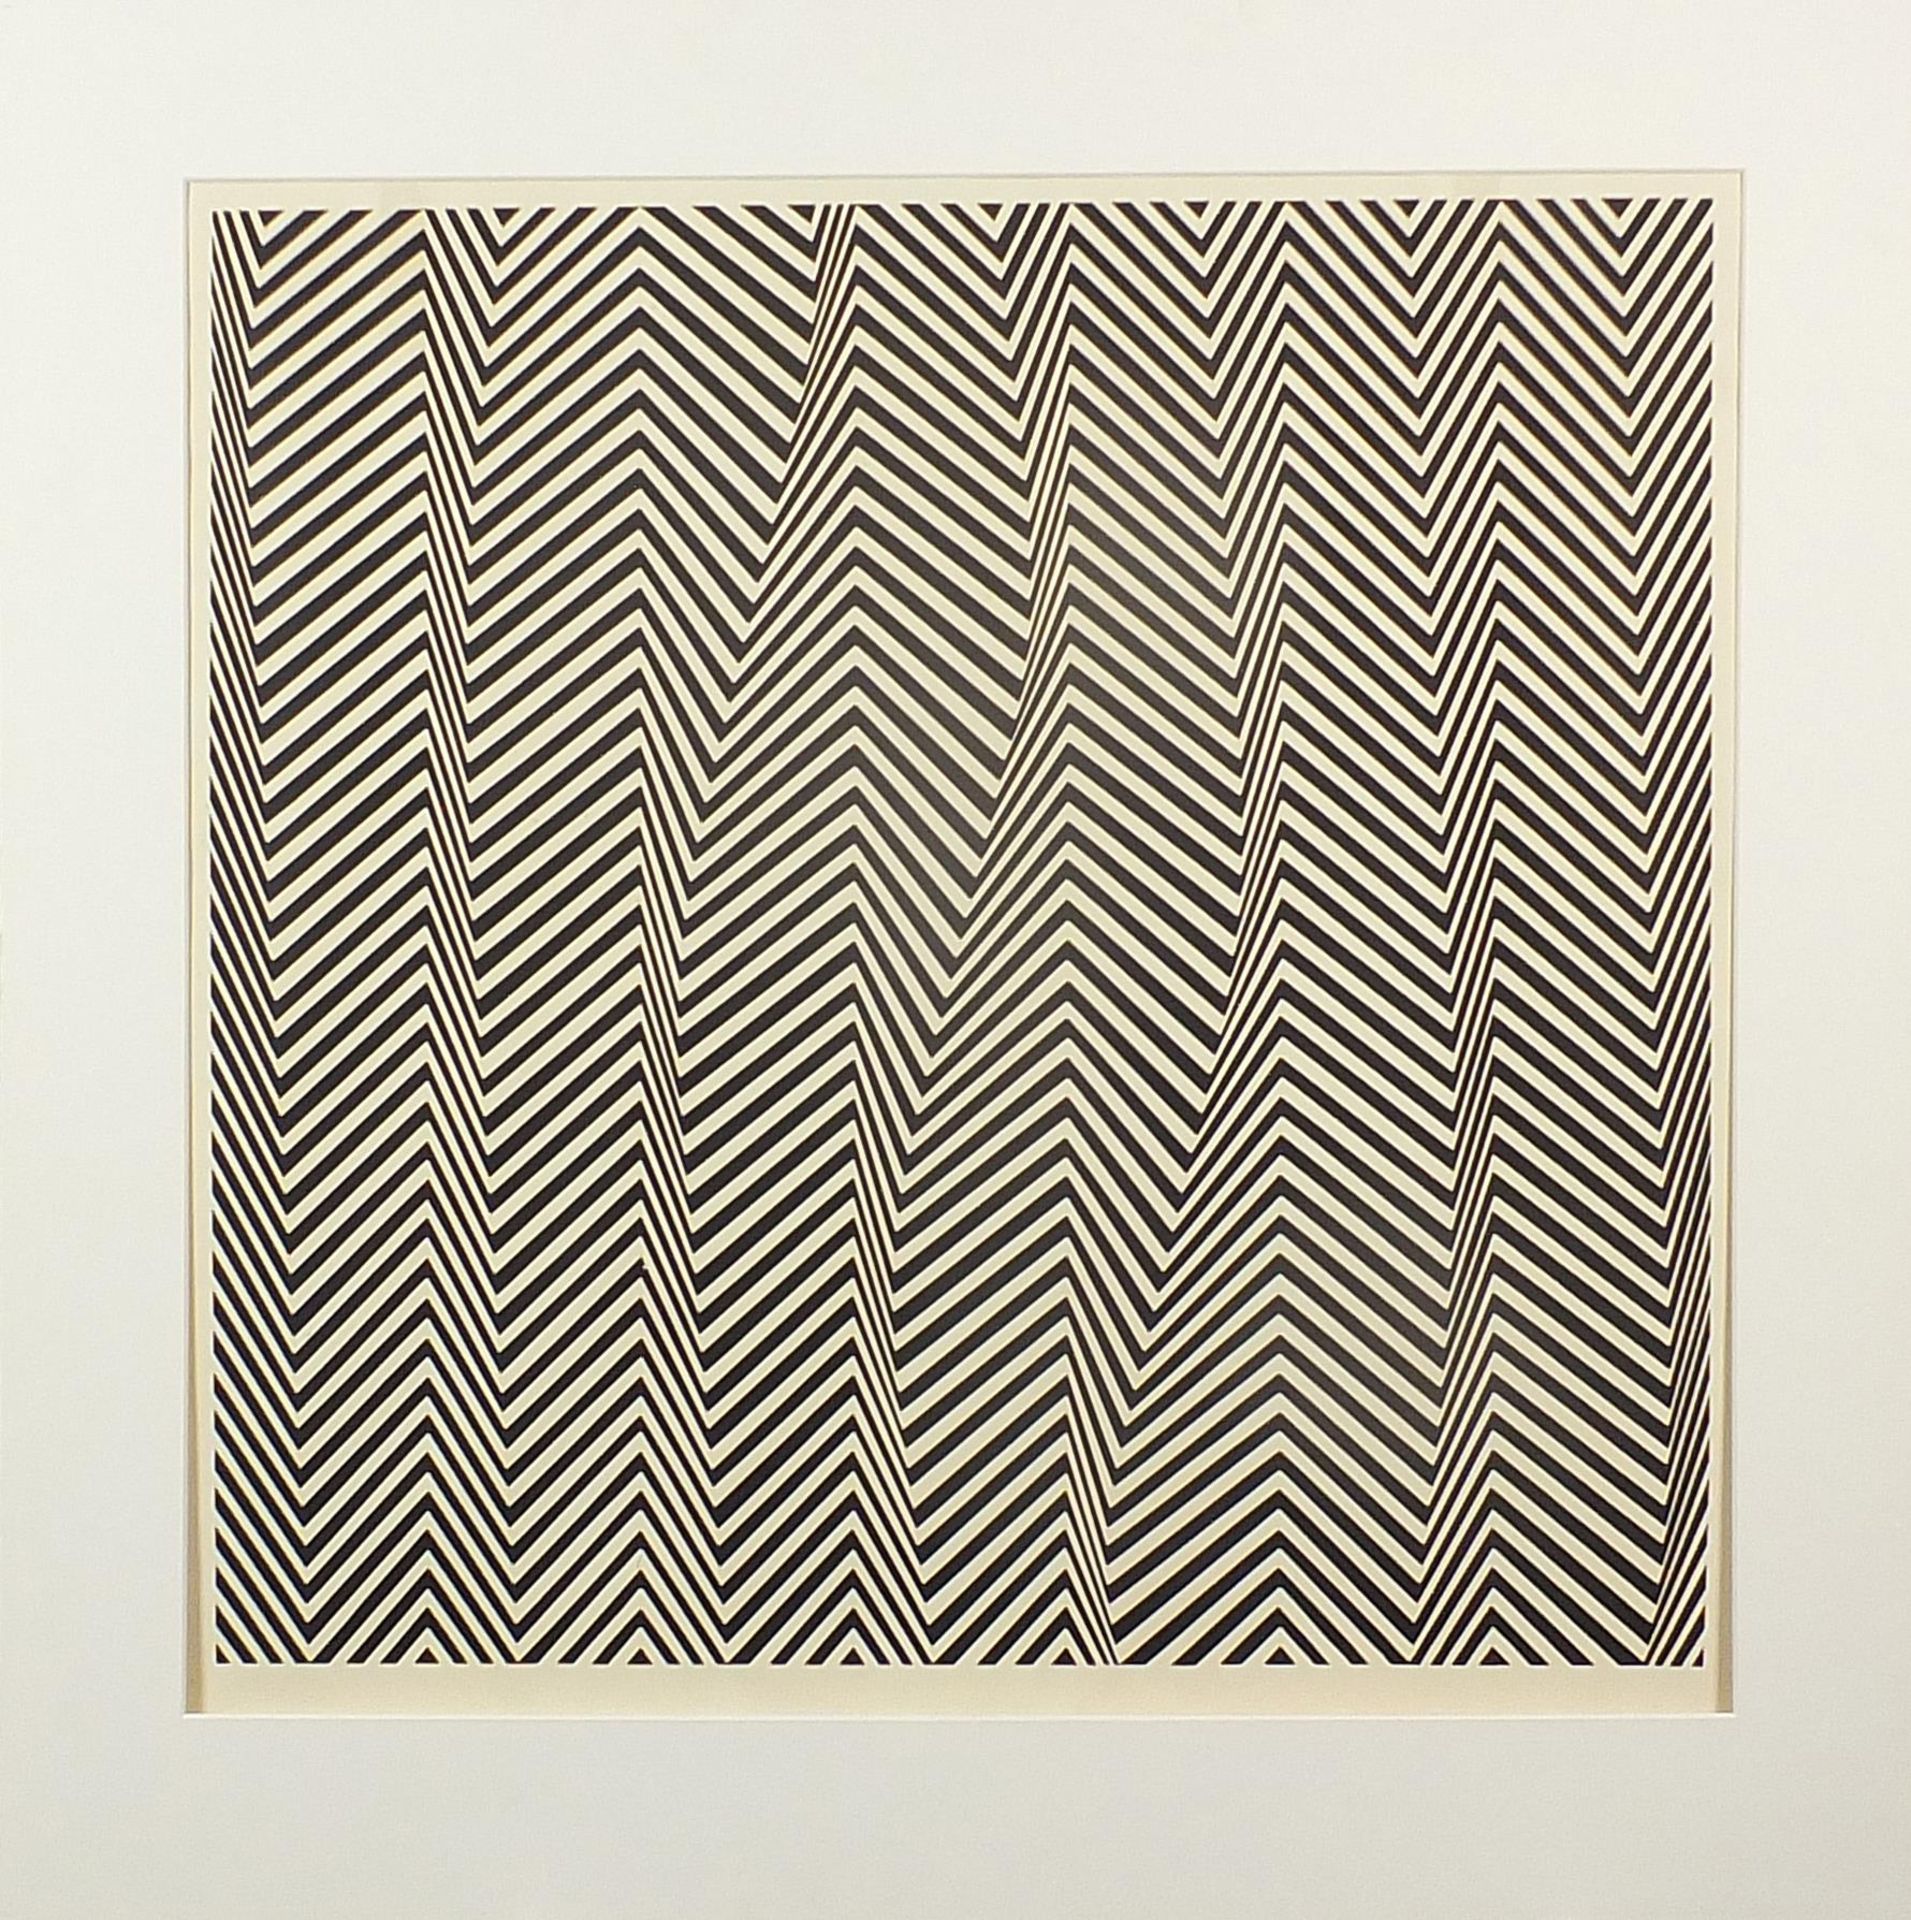 Bridget Riley - Poster Poem Ascending, 1960s screen print published by Alecto Editions 1967, mounte - Image 2 of 5